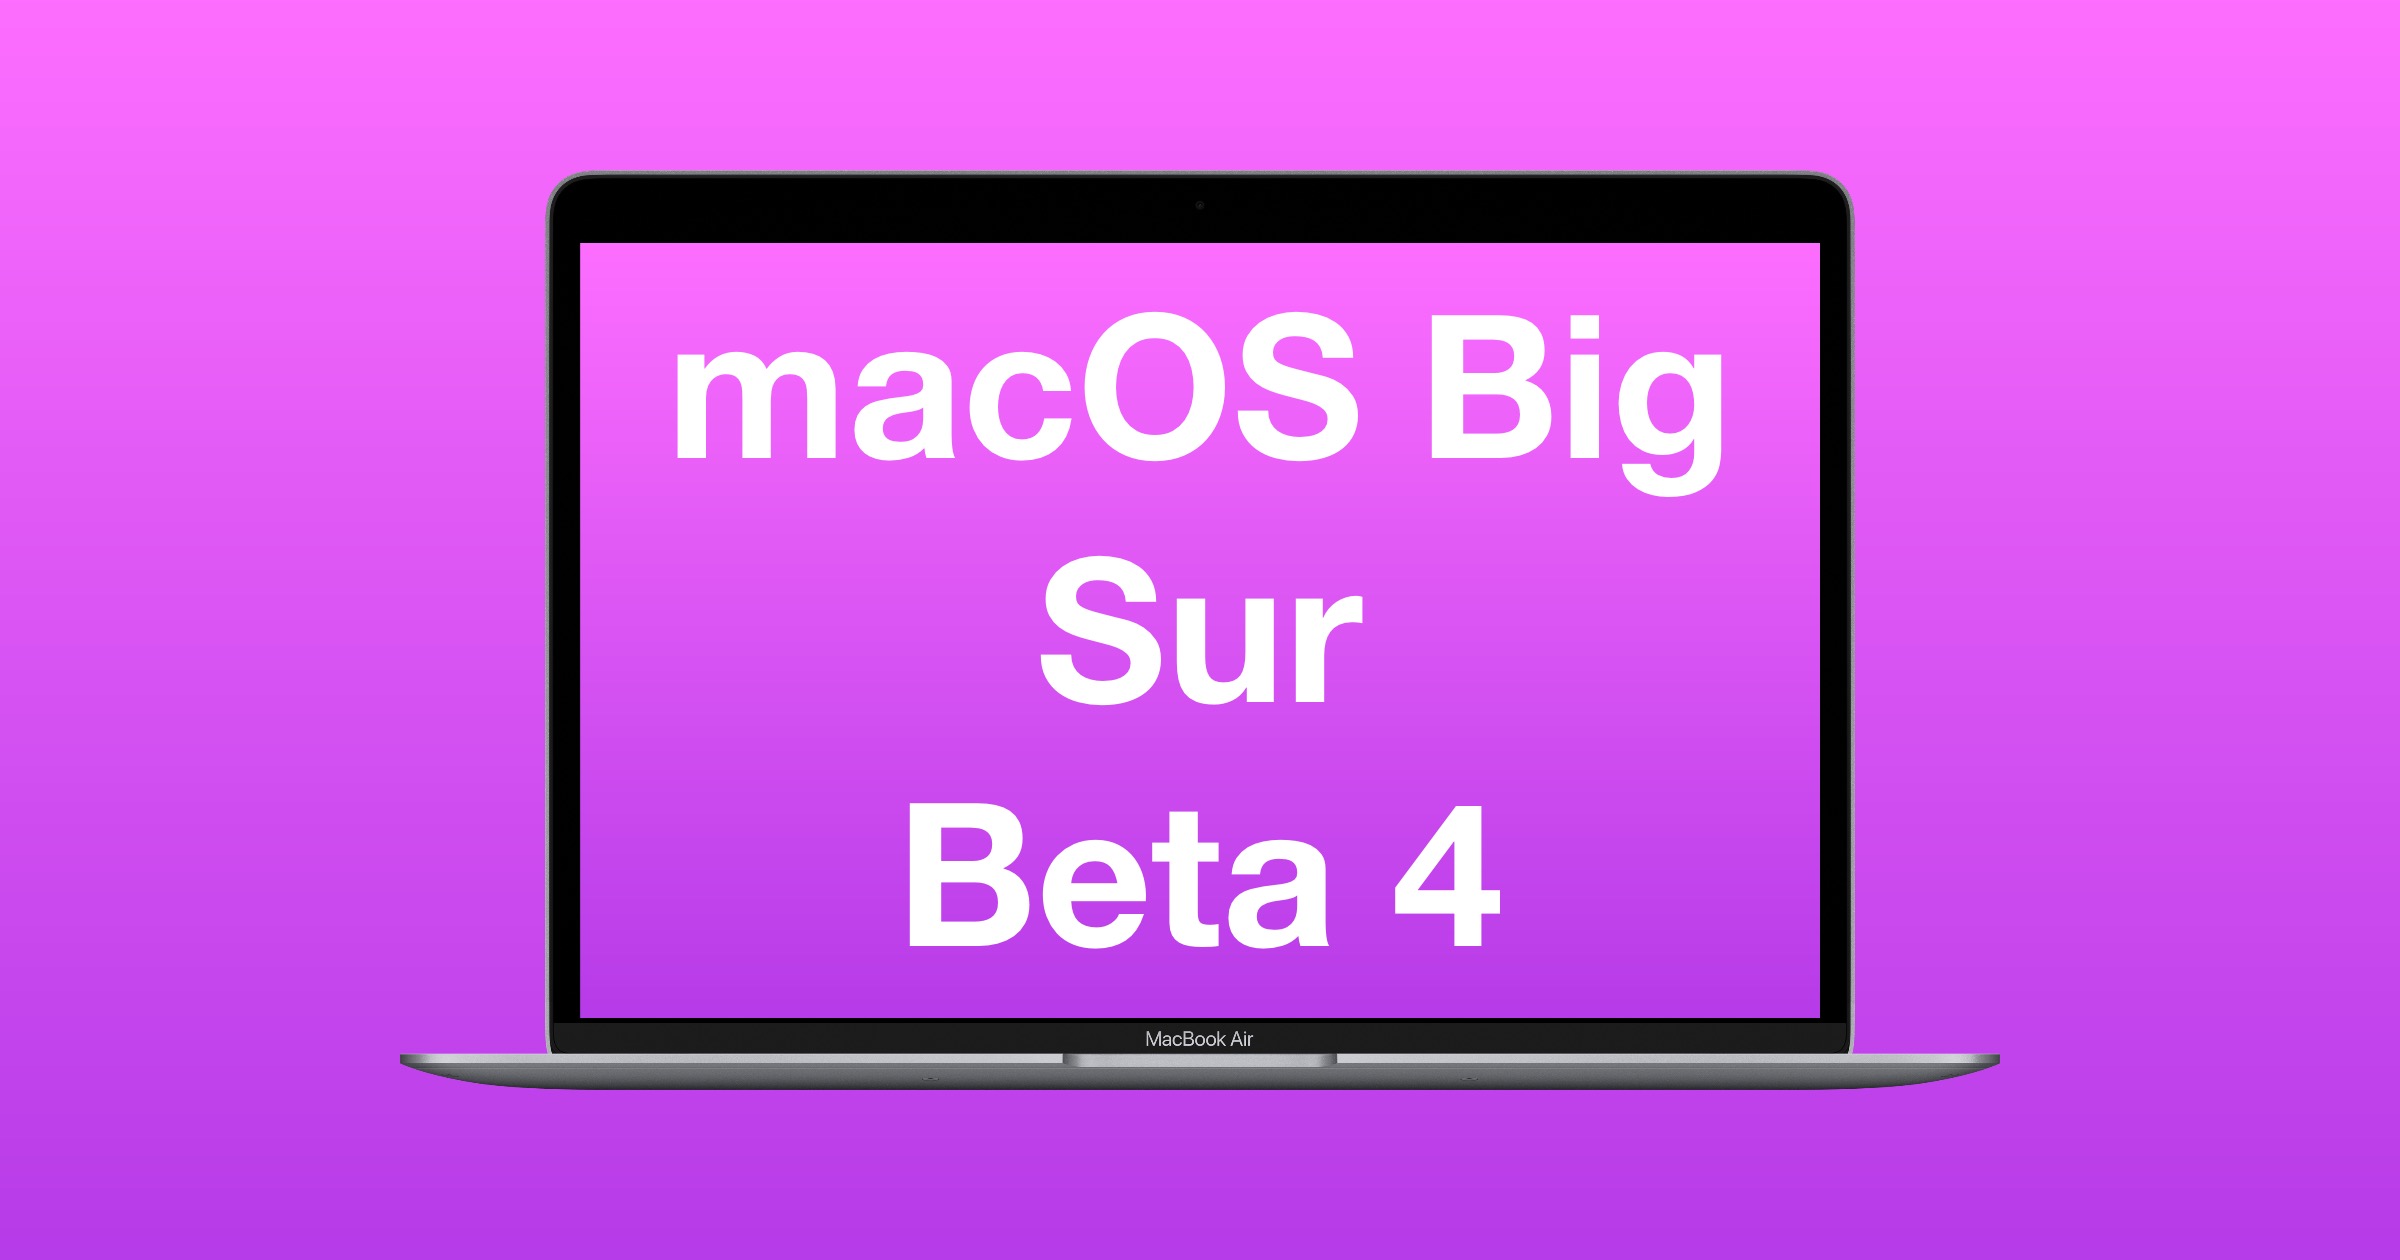 Apple Releases macOS Big Sur 11.3 Beta 4 to Developers